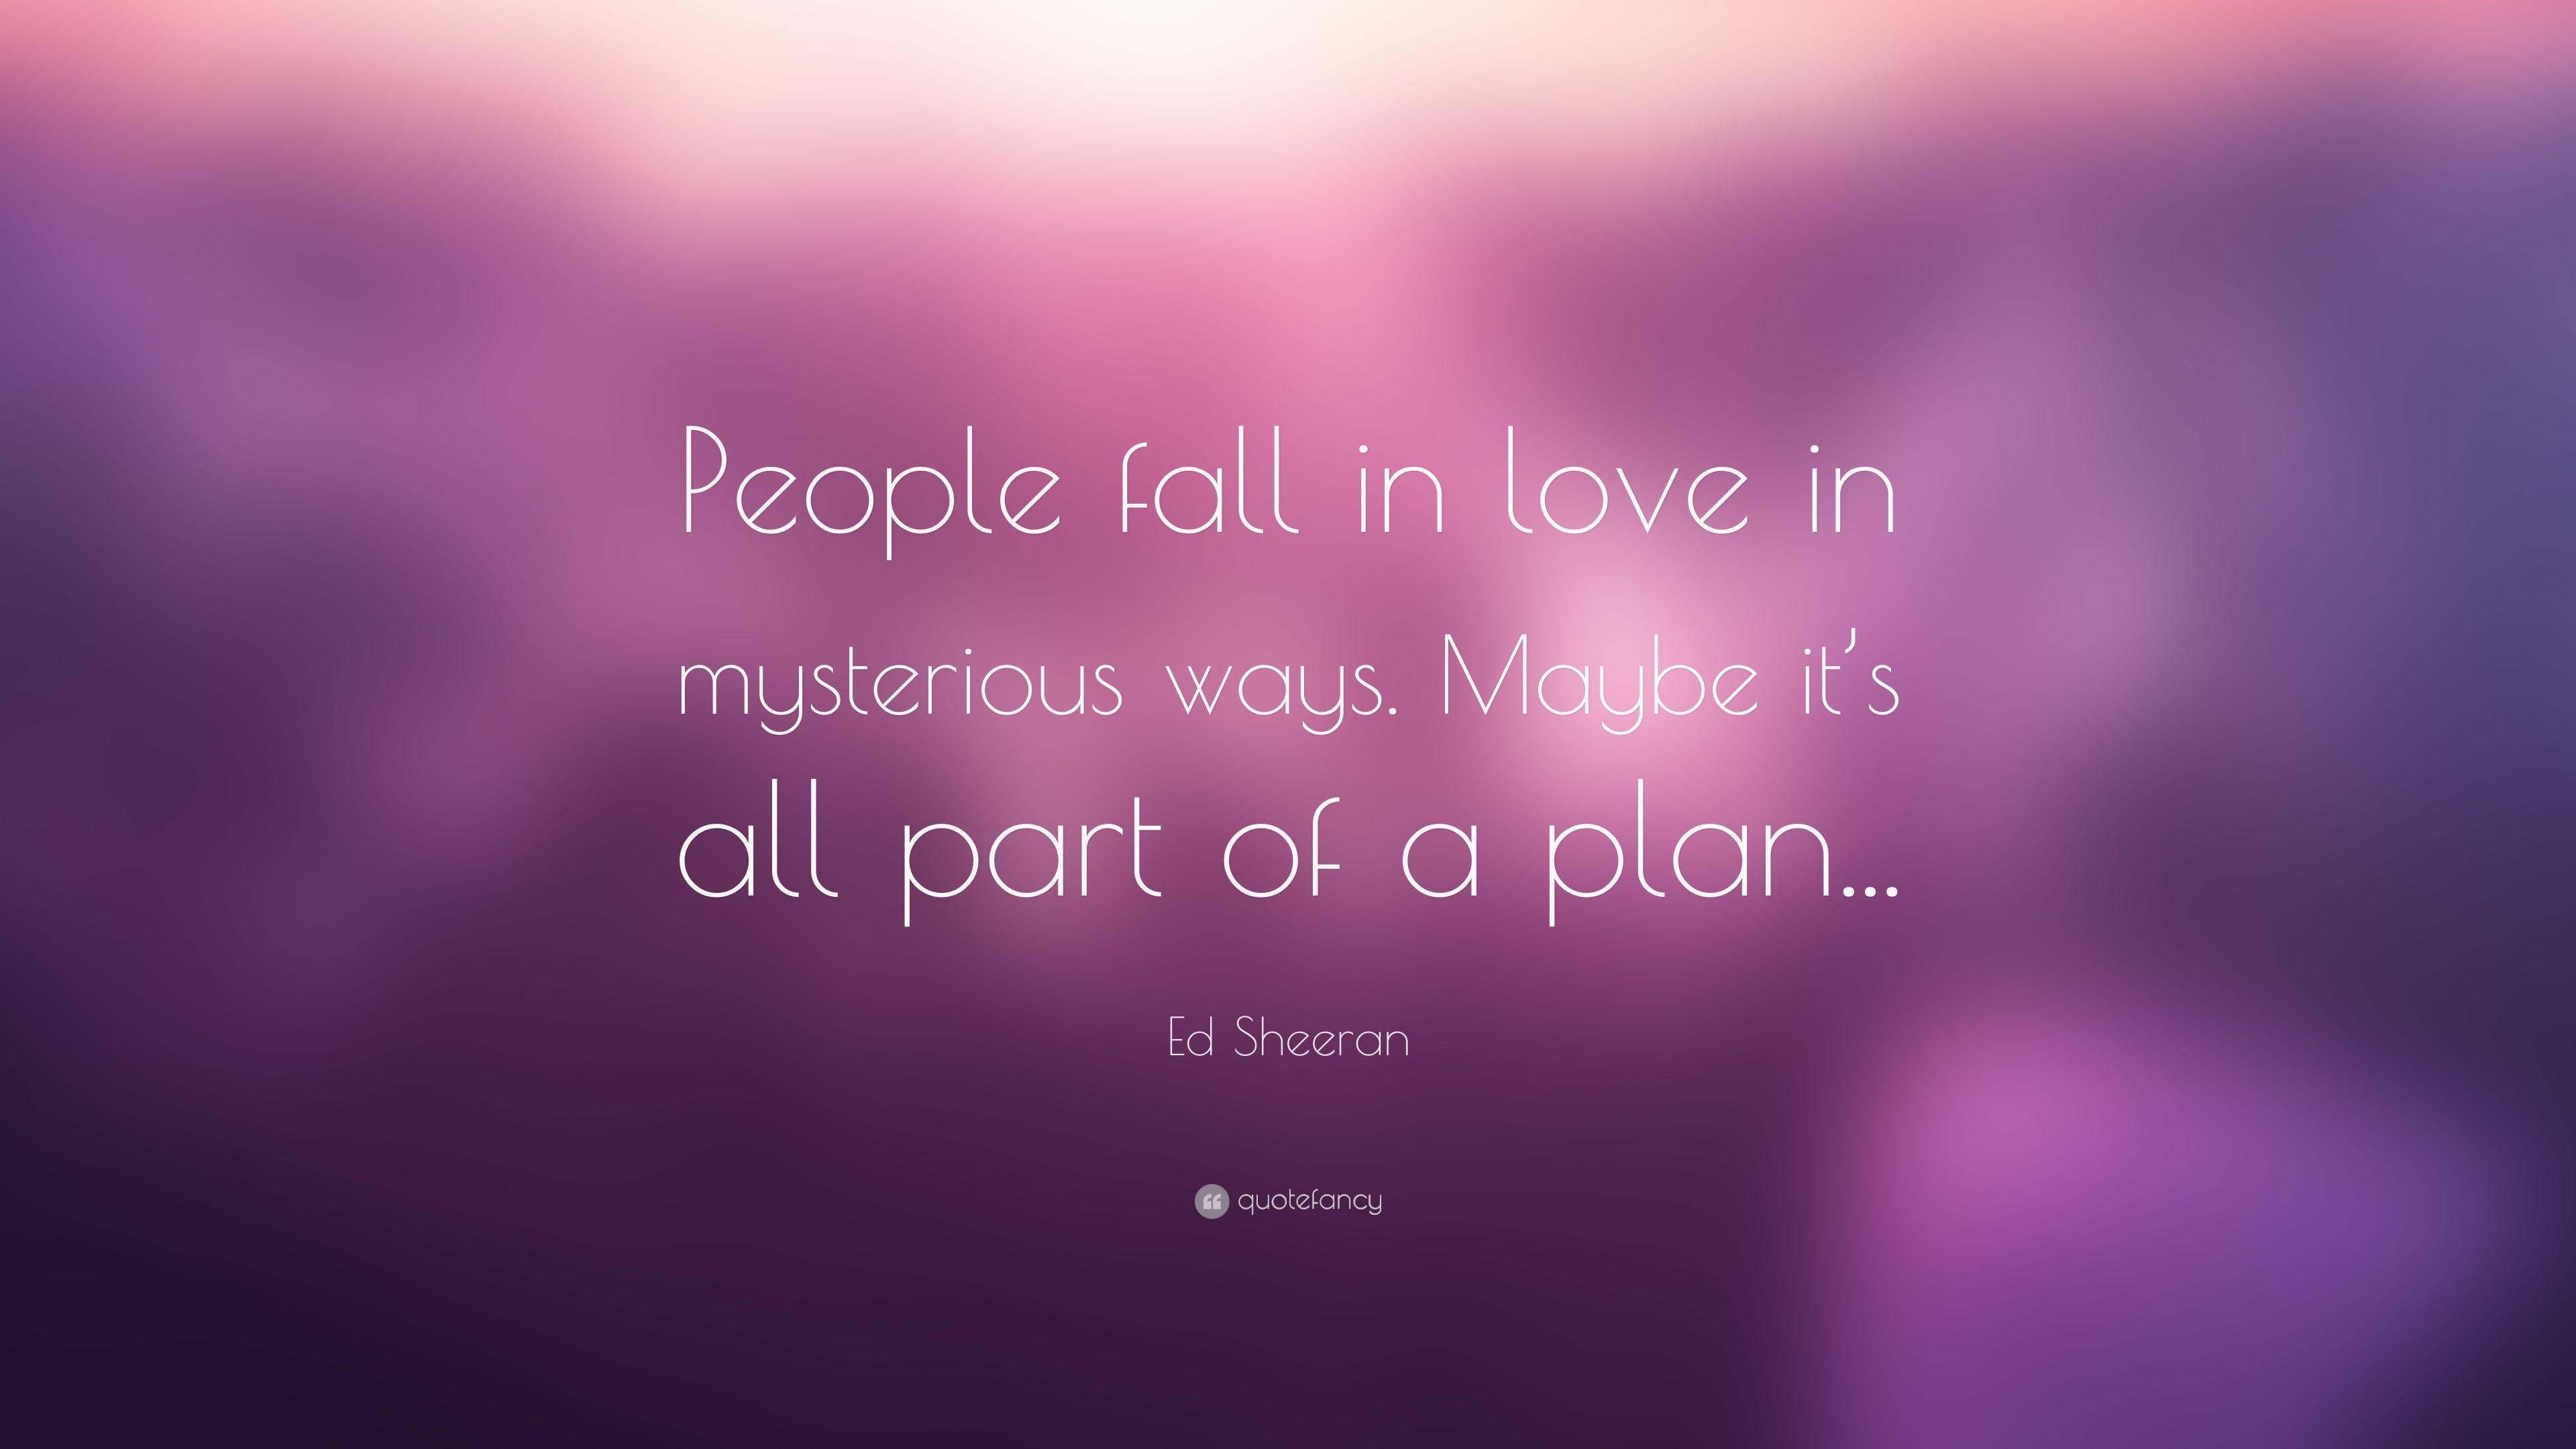 Ed Sheeran Quote: “People fall in love in mysterious ways. Maybe